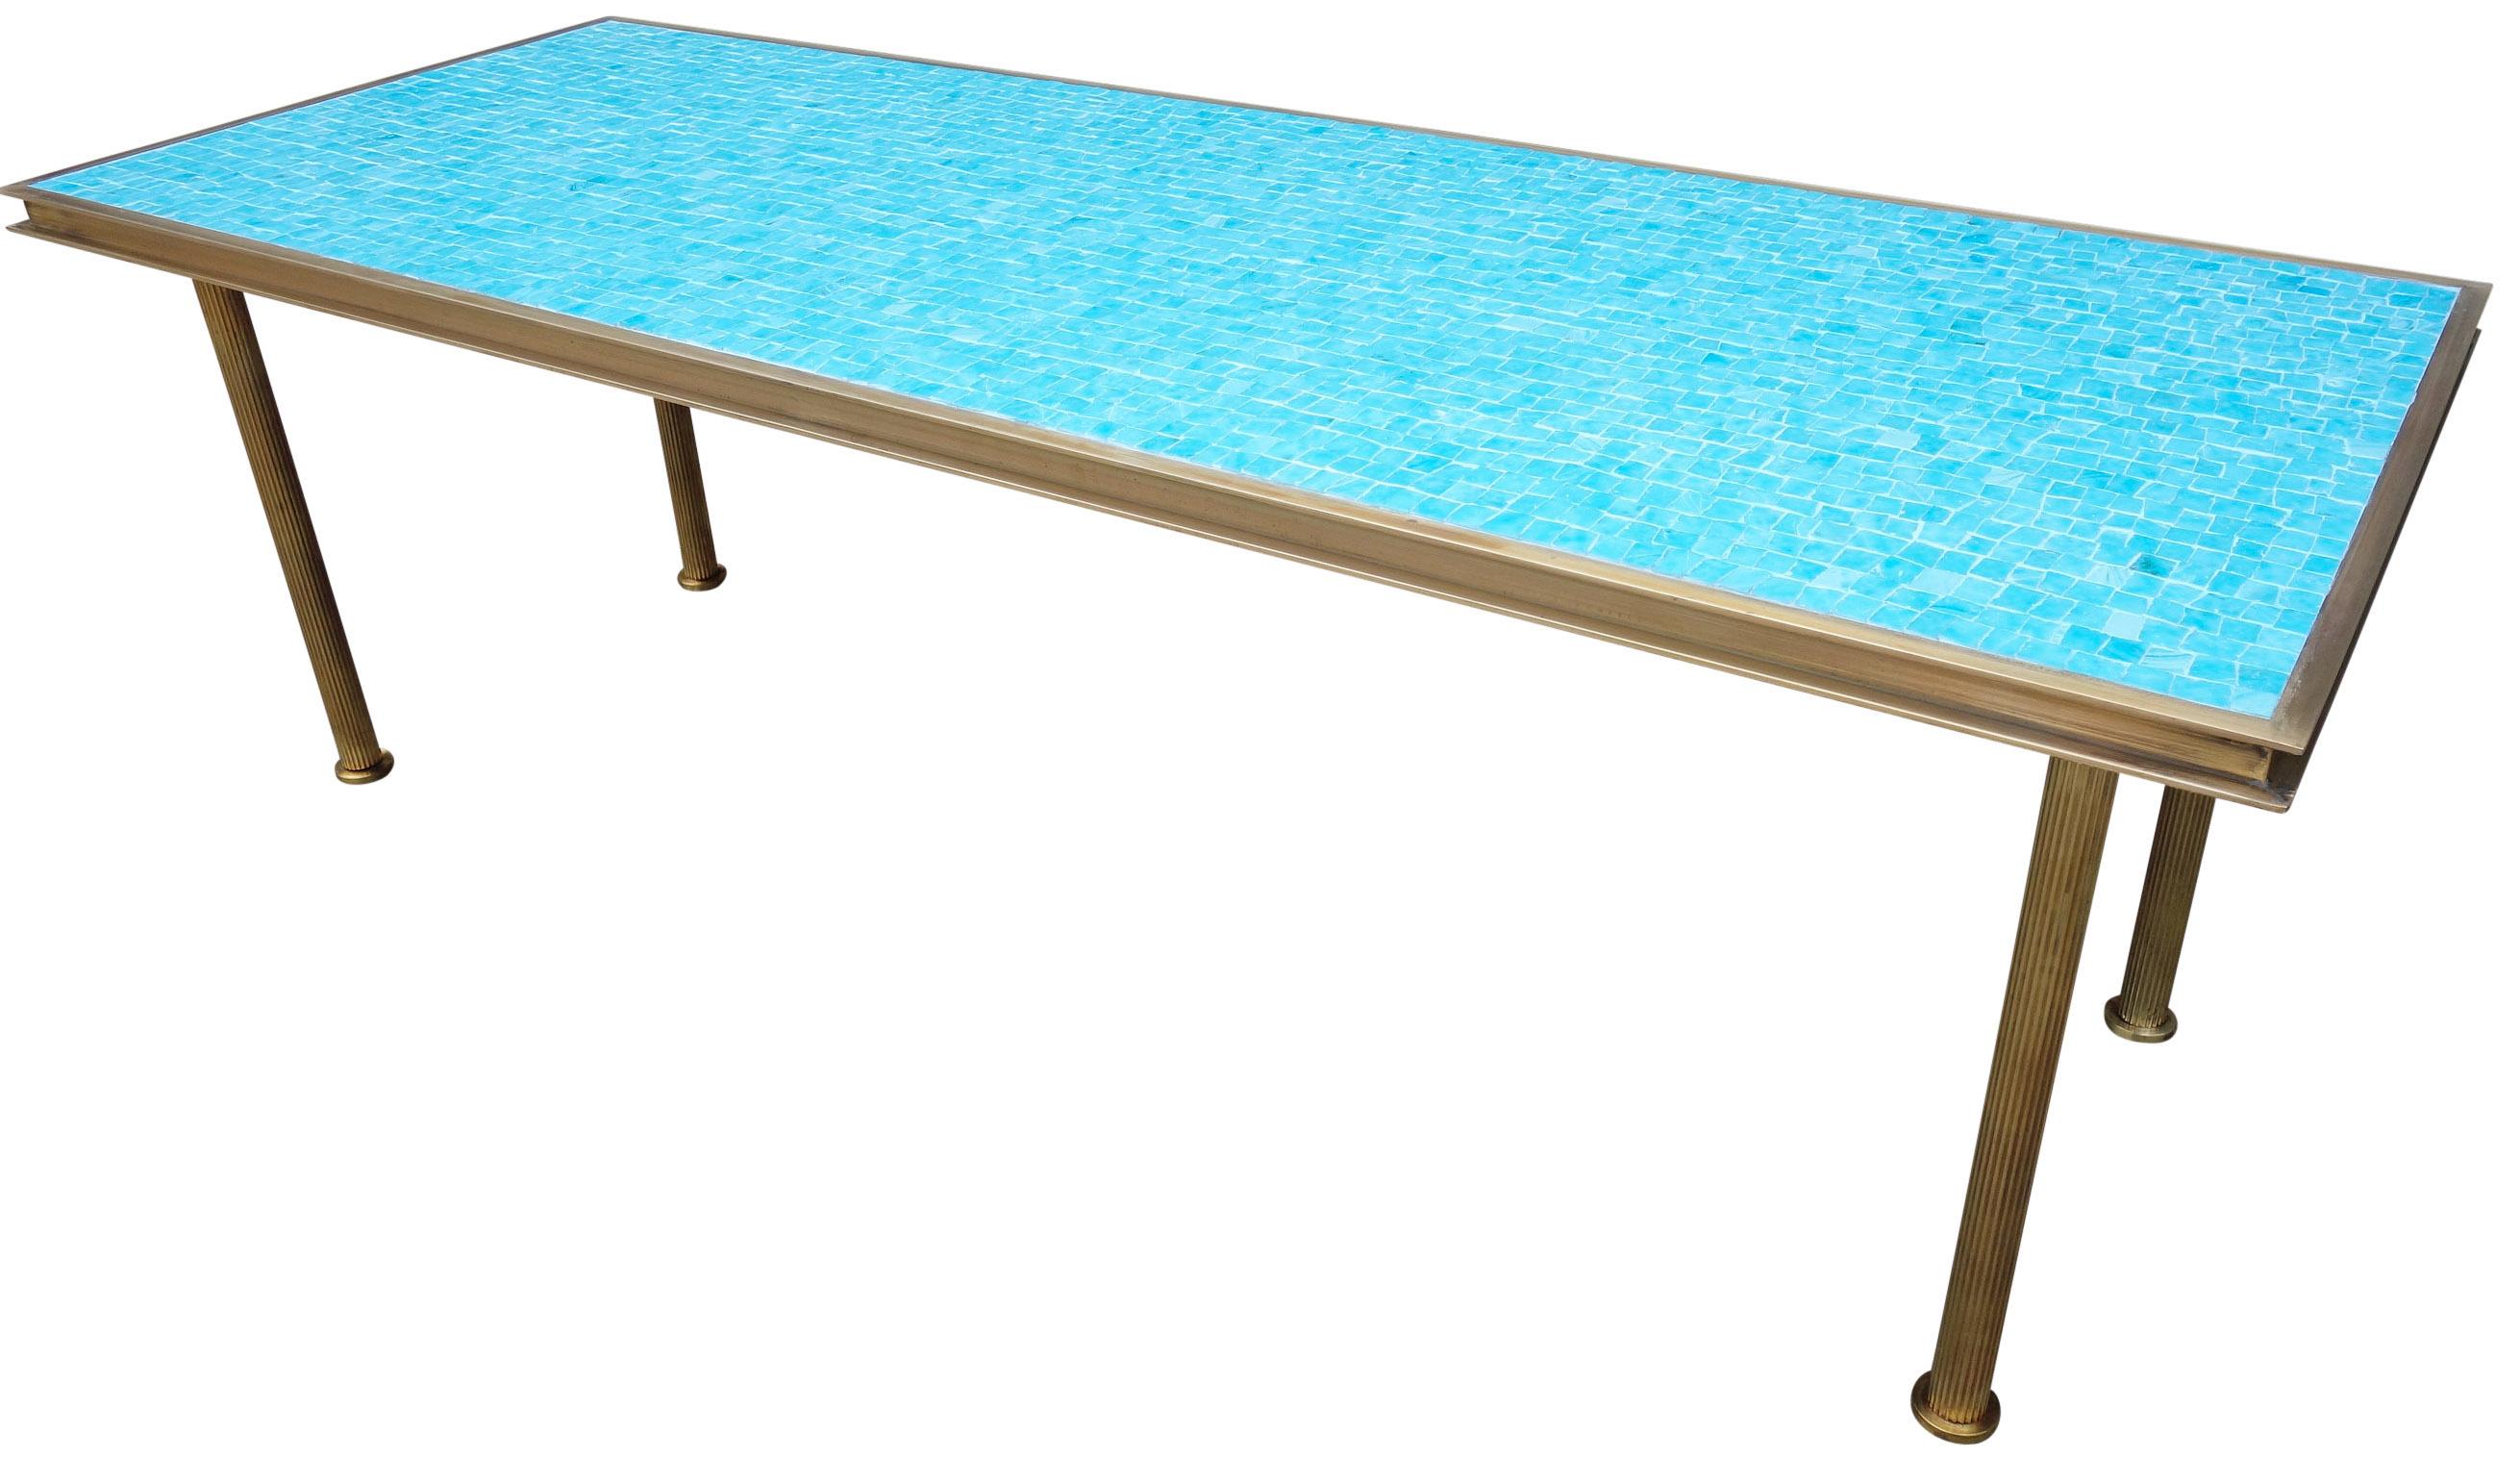 For your consideration is this beautiful glass mosaic coffee table on a solid brass frame with fluted legs in the style of Dunbar. Featuring a wonderful turquoise / Mediterranean blue colored mosaic that will highlight your space with a midcentury